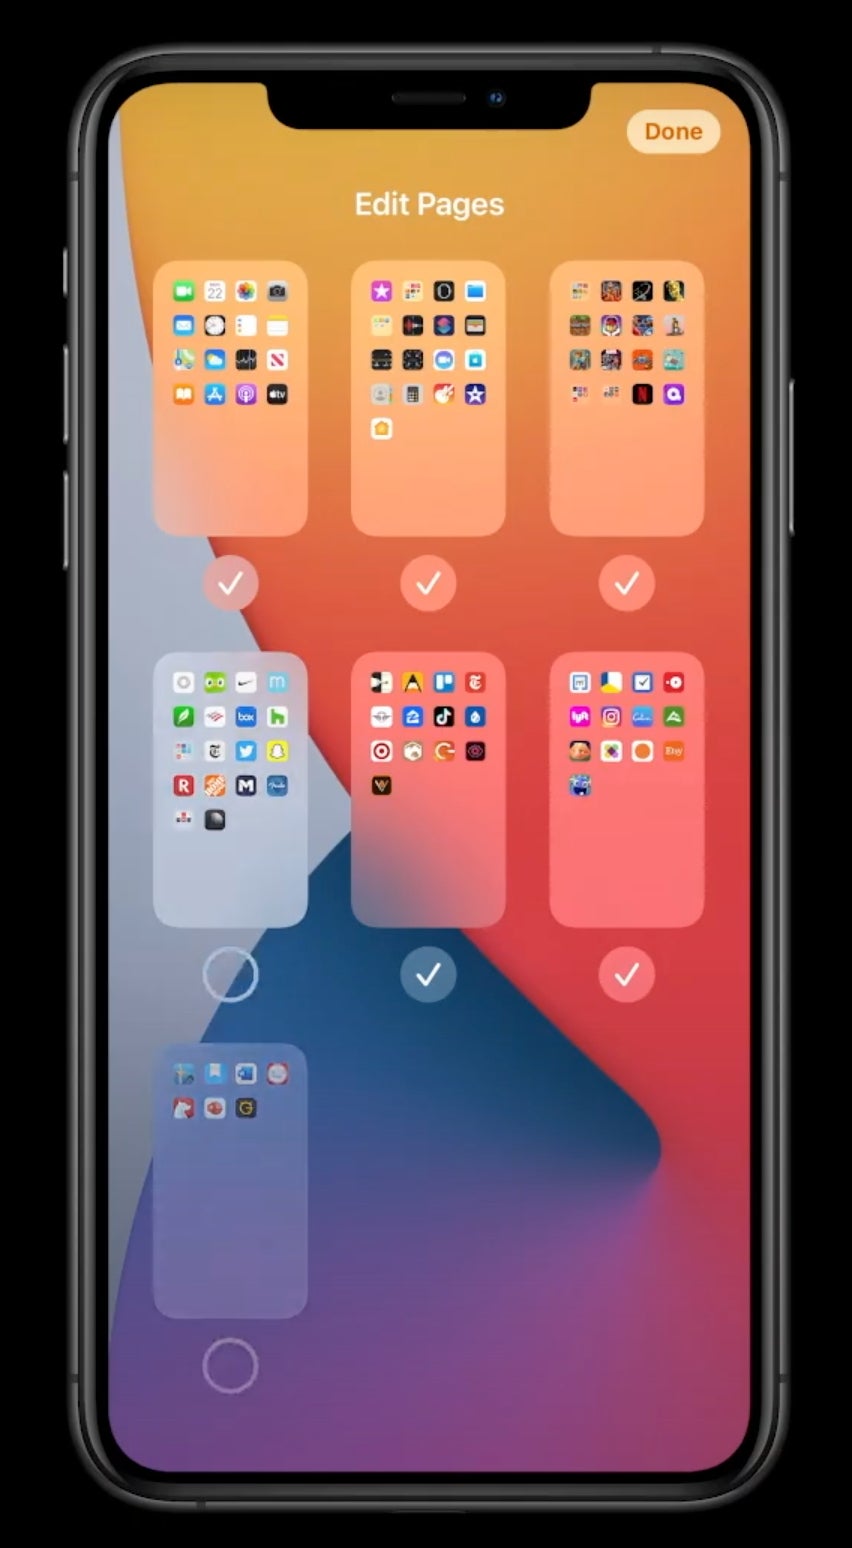 Hide homescreens to declutter your device - Apple just announced... an app drawer and widgets for iOS 14!